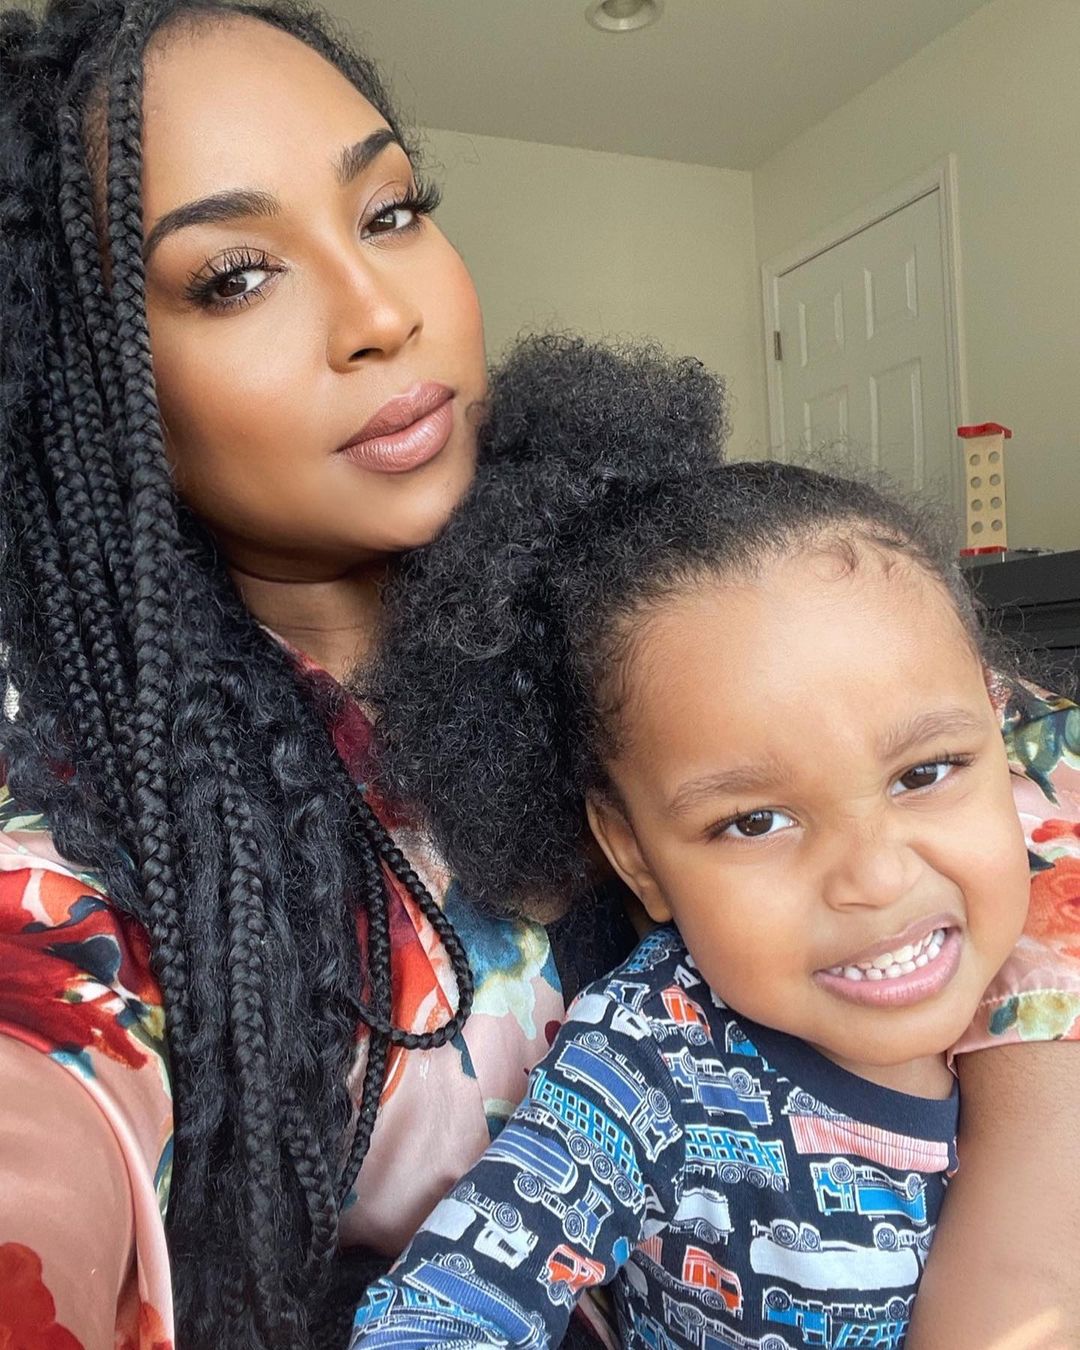 ‘I’ve Become Softer’: How Motherhood And A Two-Year Bout Of Postpartum Depression Changed ‘Bad Girl’ Tanisha Thomas